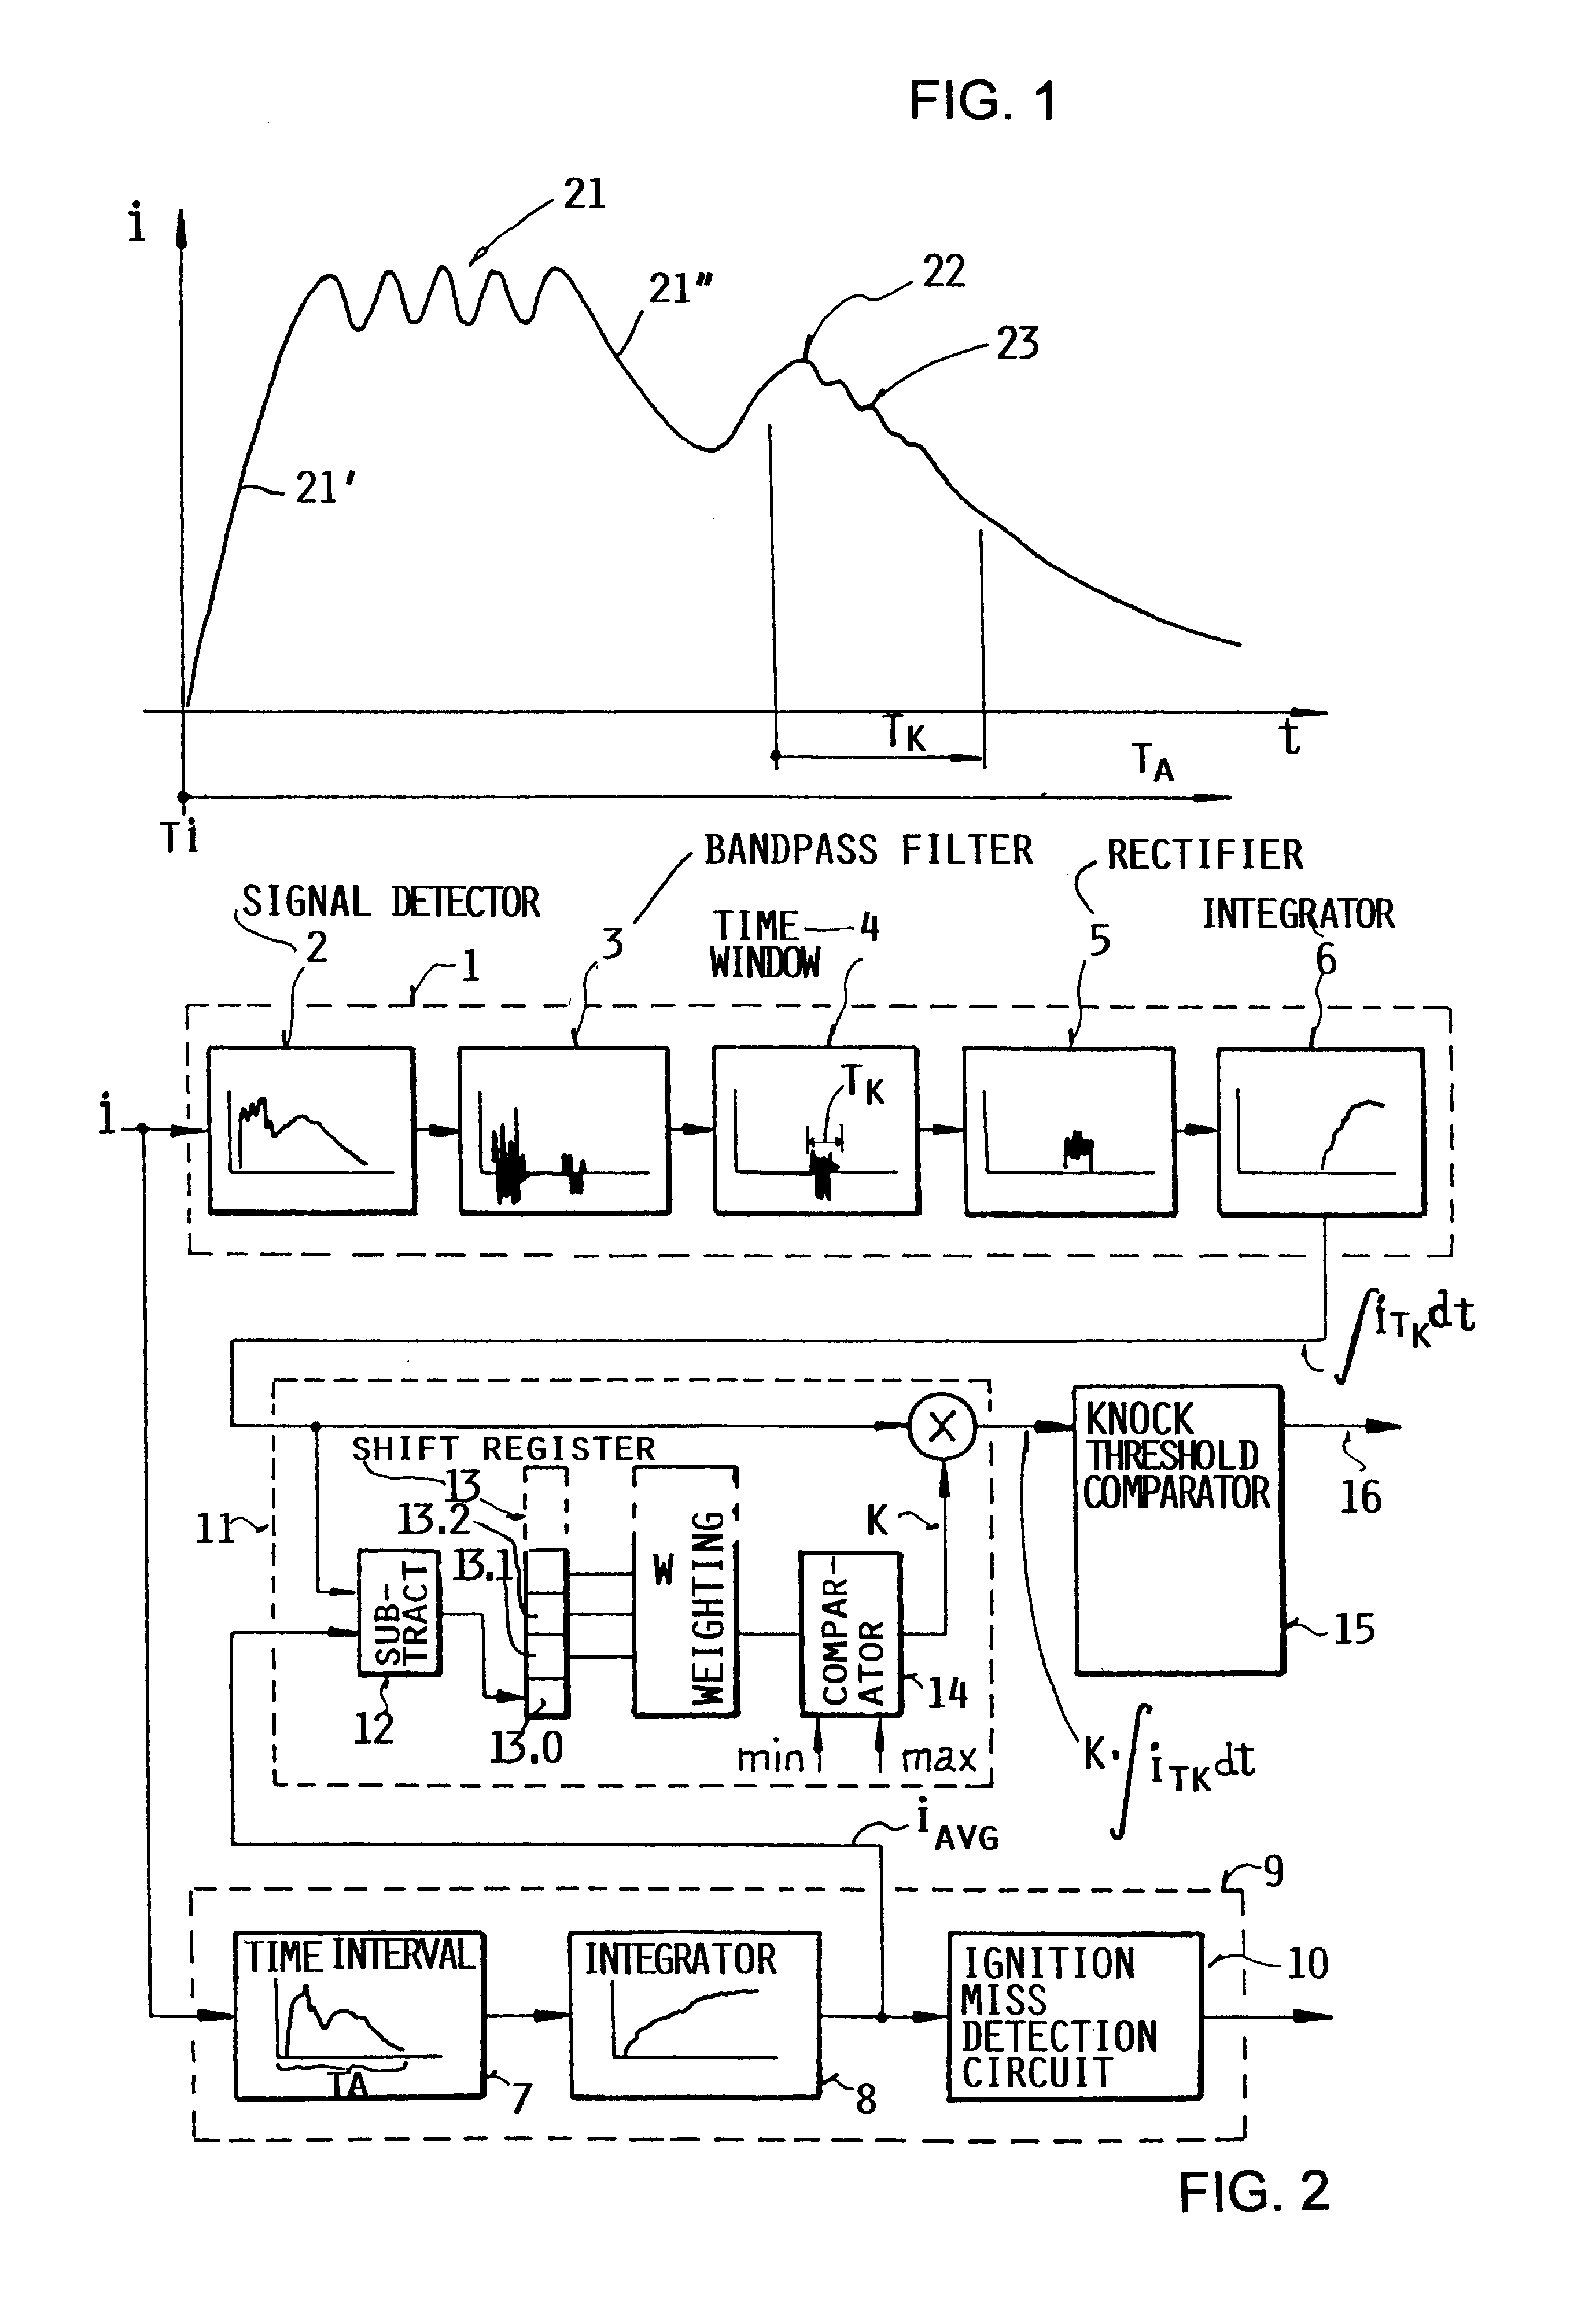 Method and apparatus for detecting combustion knock from the ionic current in an internal combustion engine